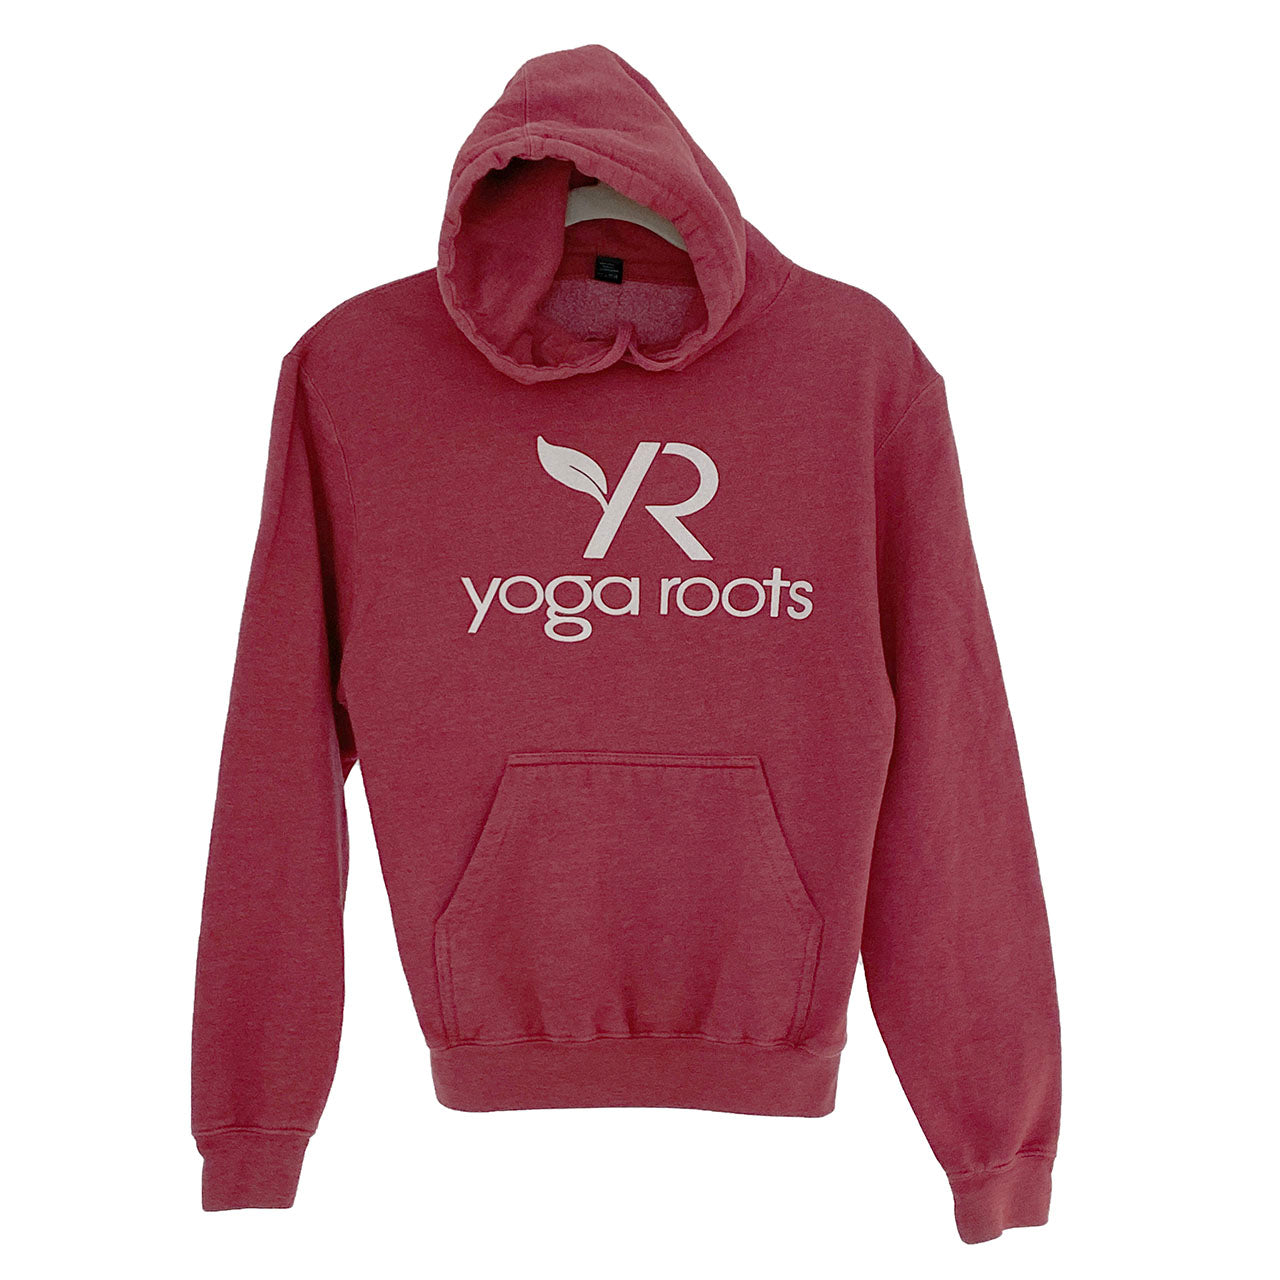 Yoga-Roots-Weathered-Red-Hoodie-Sweatshirt by Tultrex.  Shop-ebargainsanddeals.com